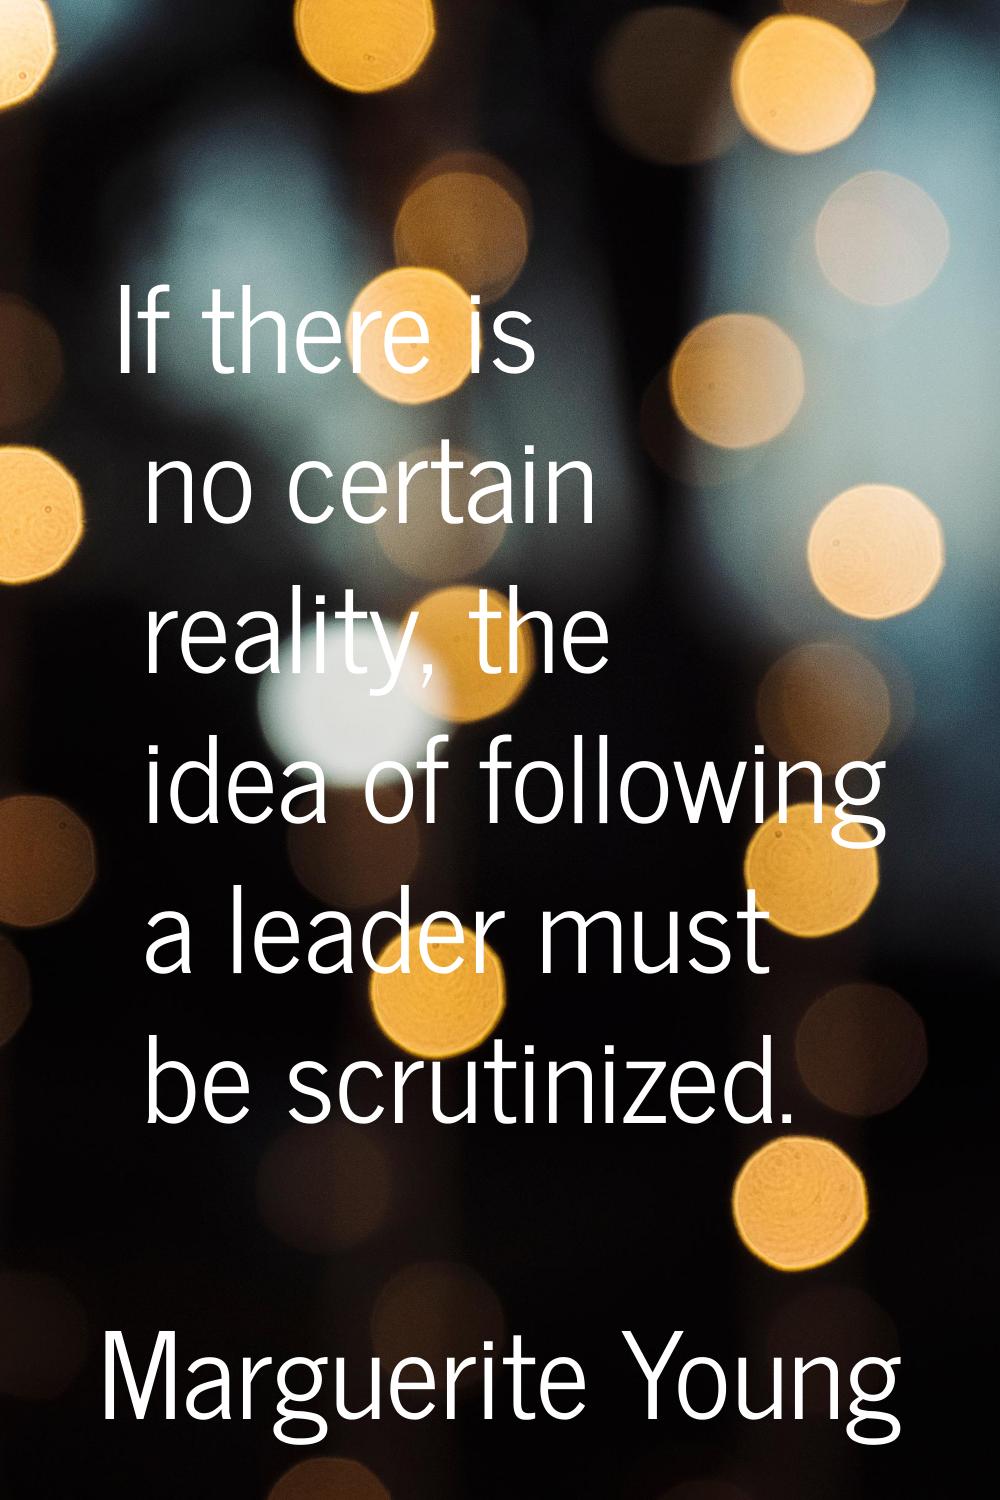 If there is no certain reality, the idea of following a leader must be scrutinized.